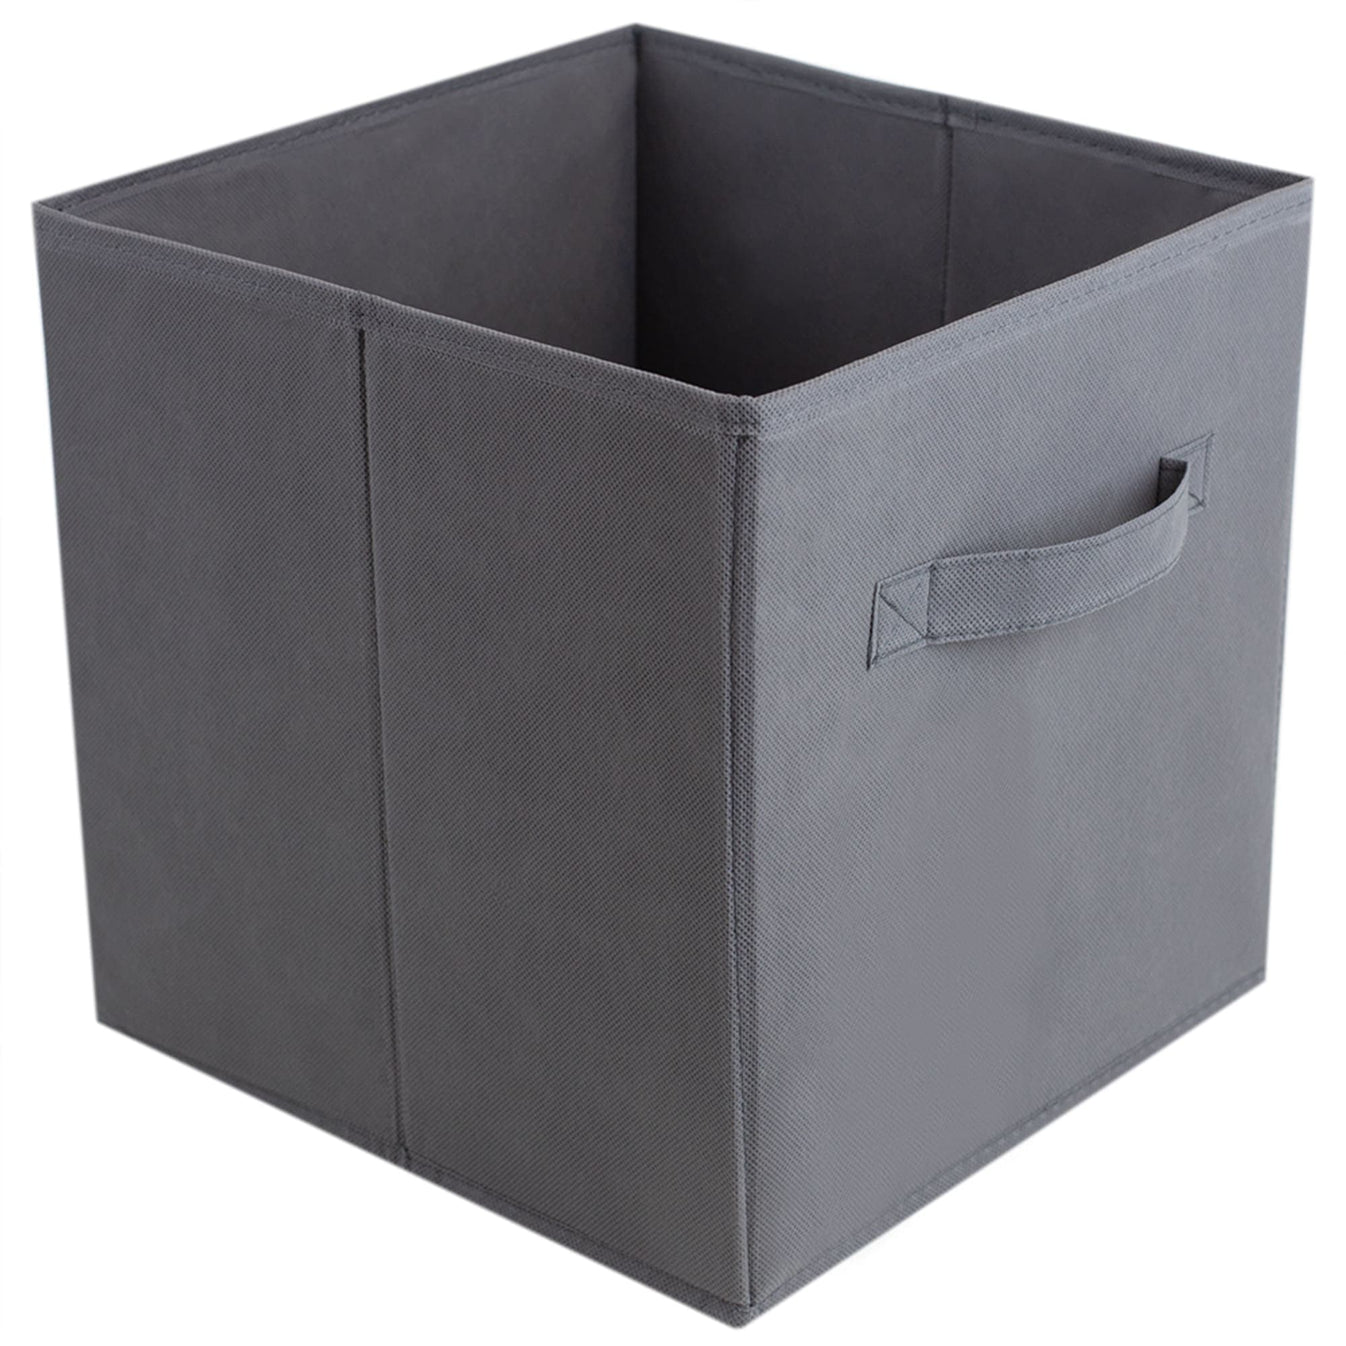 Collapsible and Foldable Non-Woven Storage Cube, Charcoal | STORAGE ...